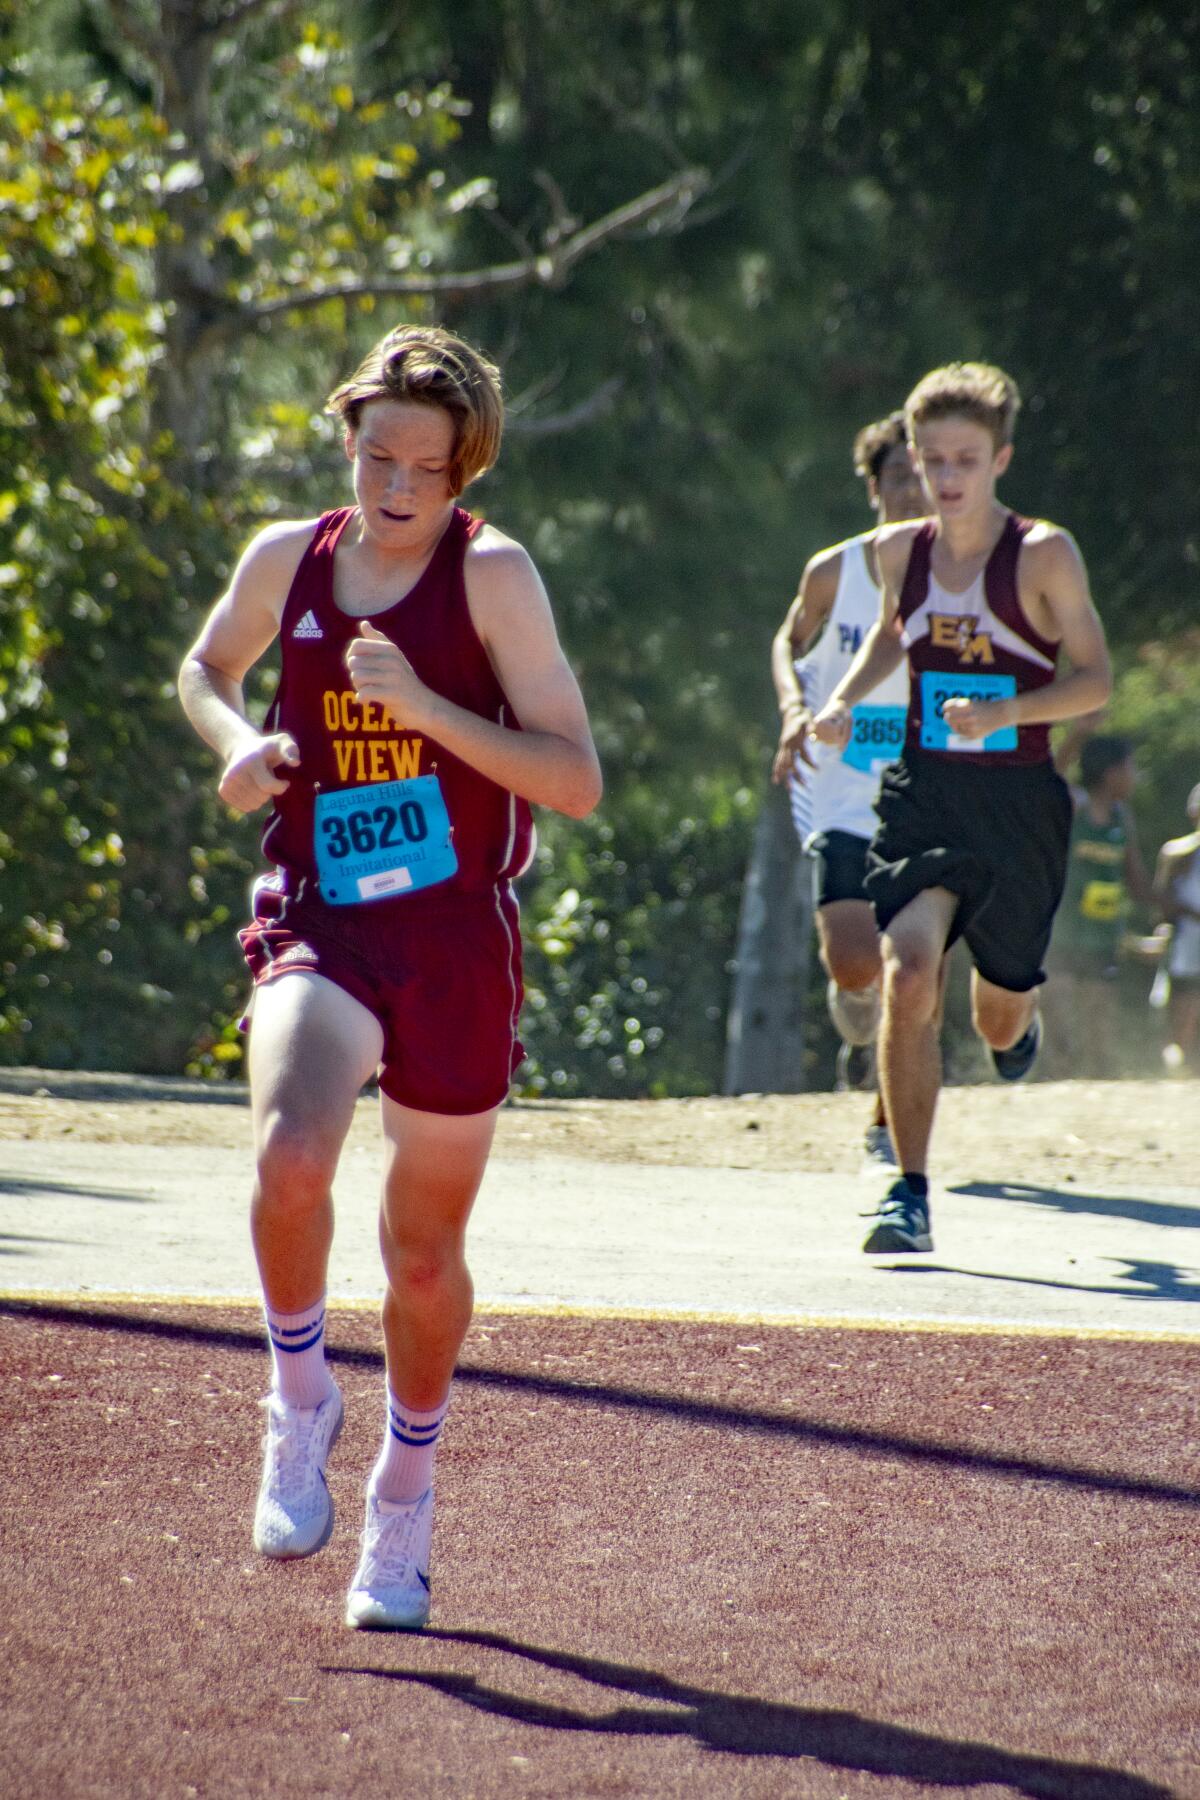 Ocean View's Brandon Gayler finished second in the Division 3 boys' sophomore race on Saturday at the Laguna Hills Invitational.